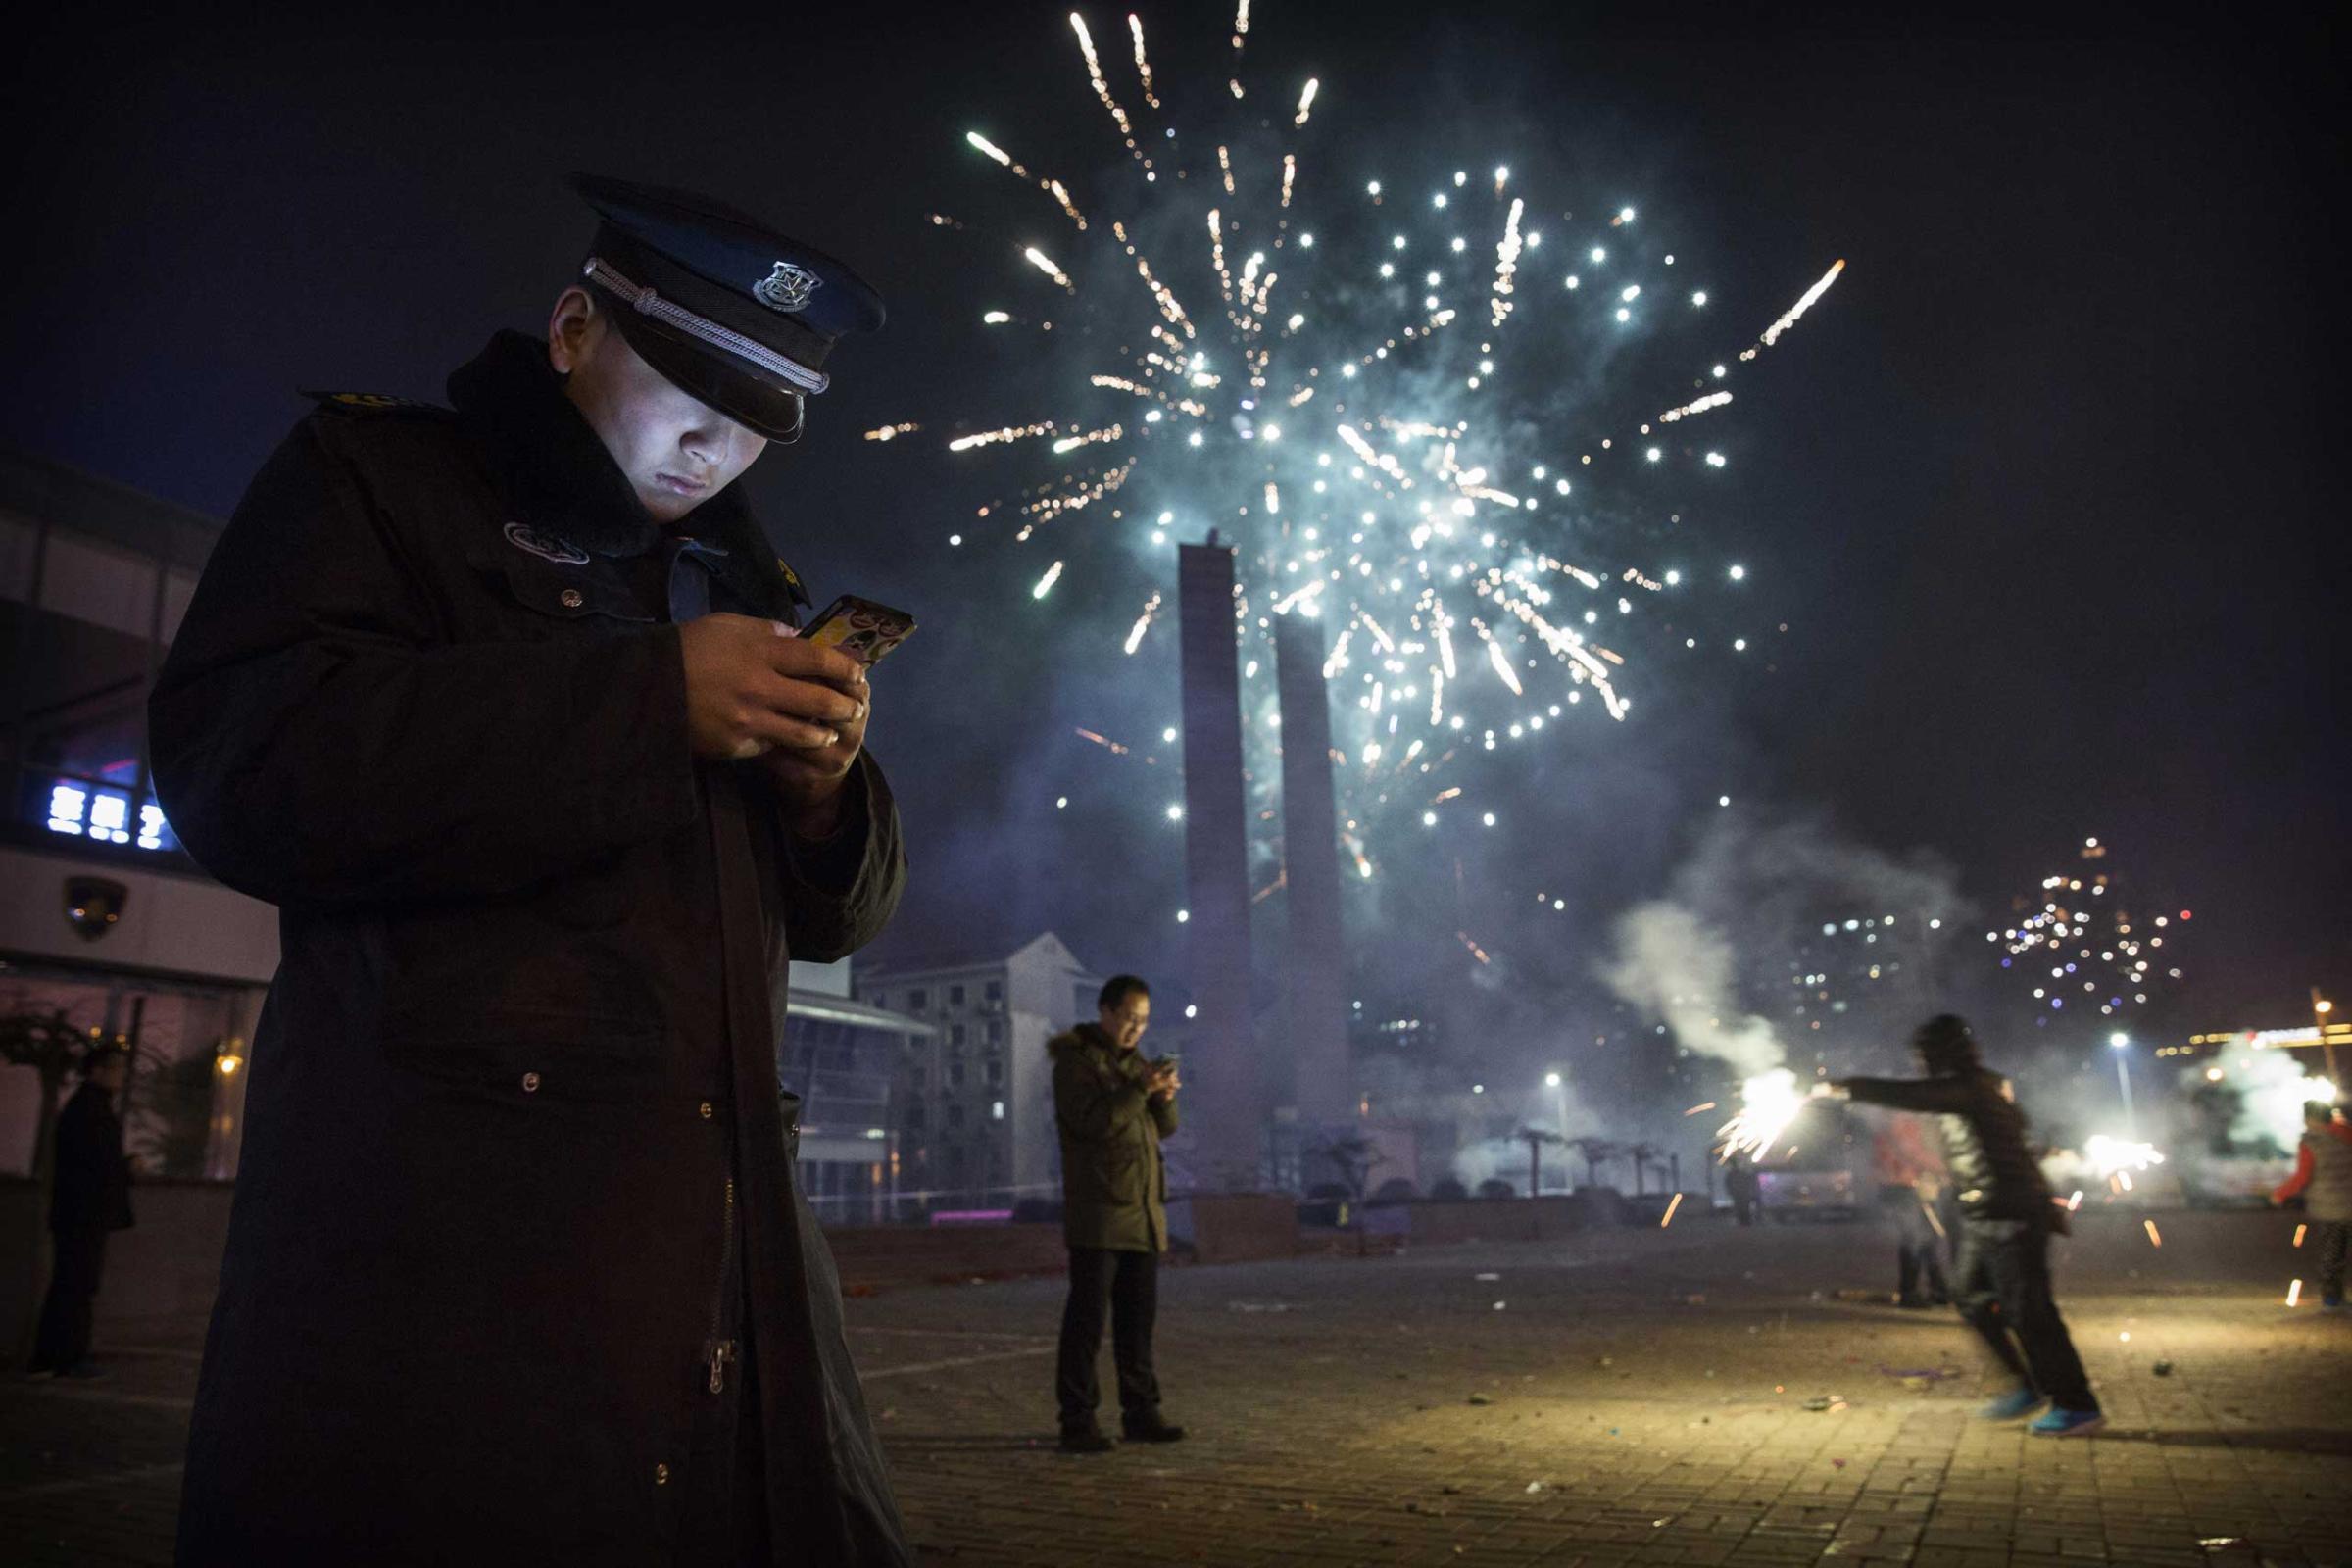 A Chinese security guard checks his smartphone as fireworks explode during celebrations of the Lunar New early on Feb. 19, 2015 in Beijing.